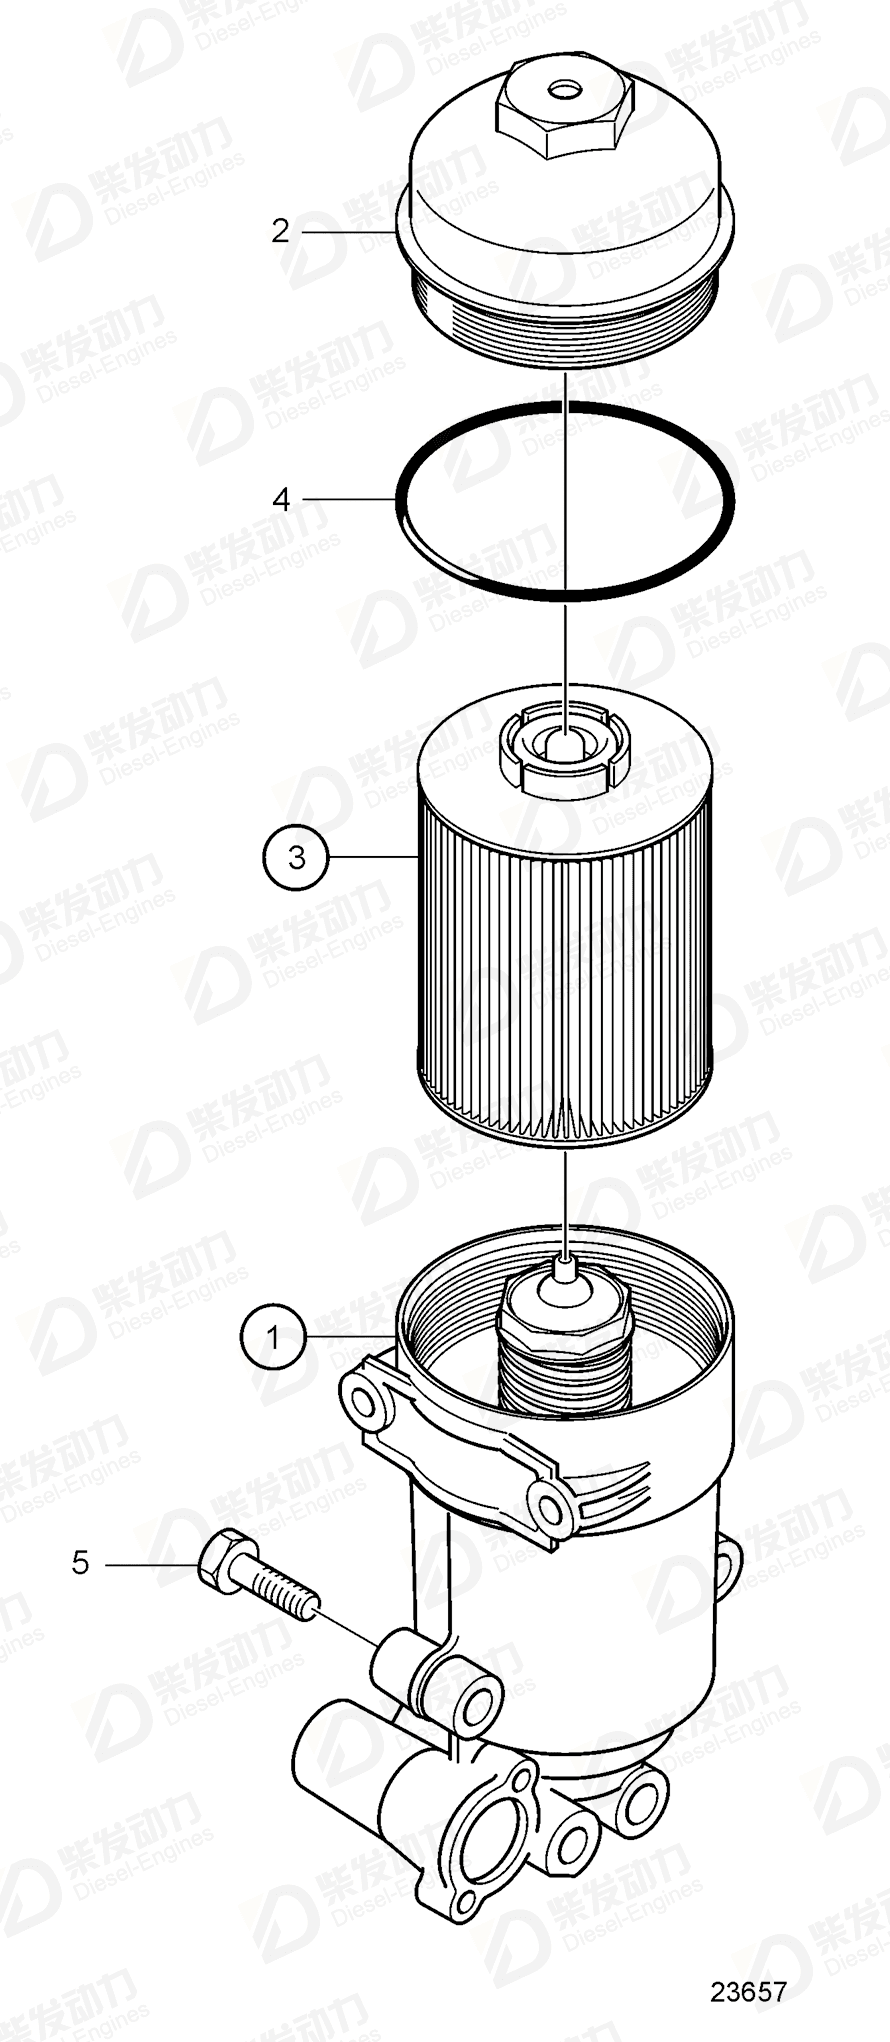 VOLVO Fuel filter 20860690 Drawing